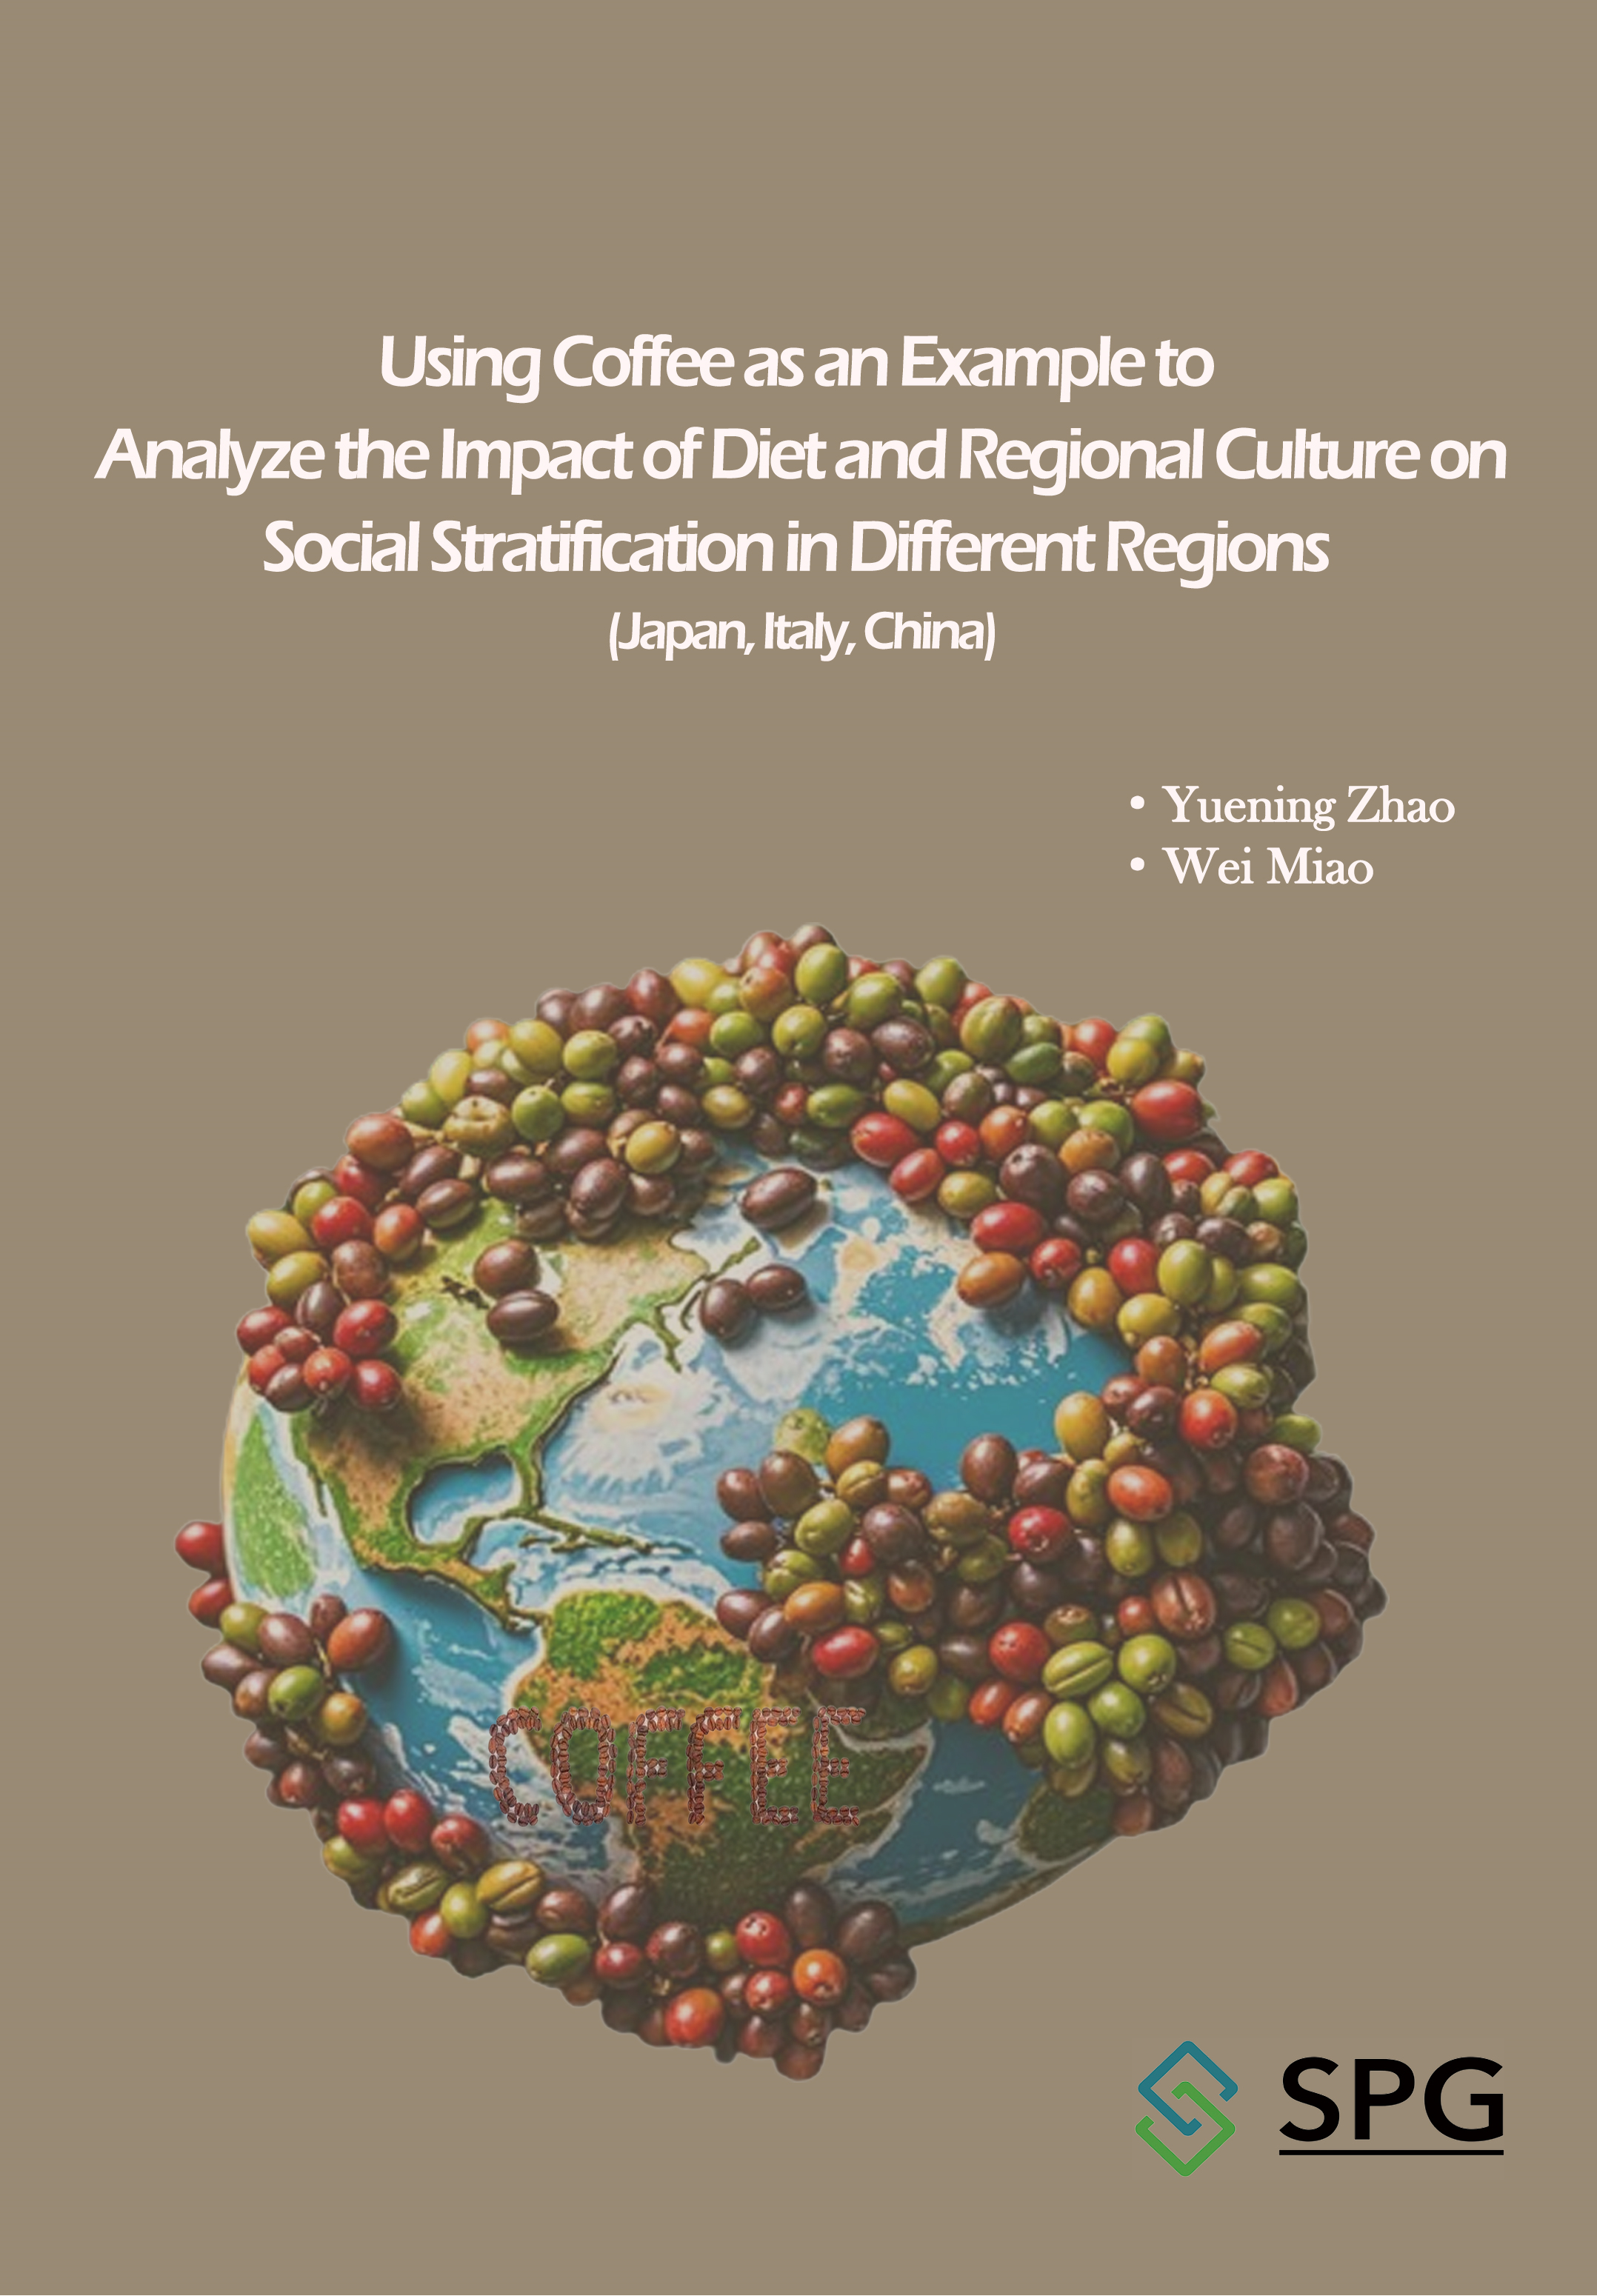 Using Coffee as an Example to Analyze the Impact of Diet and Regional Culture on Social Stratification in Different Regions (Japan, Italy, China) | Scholar Publishing Group